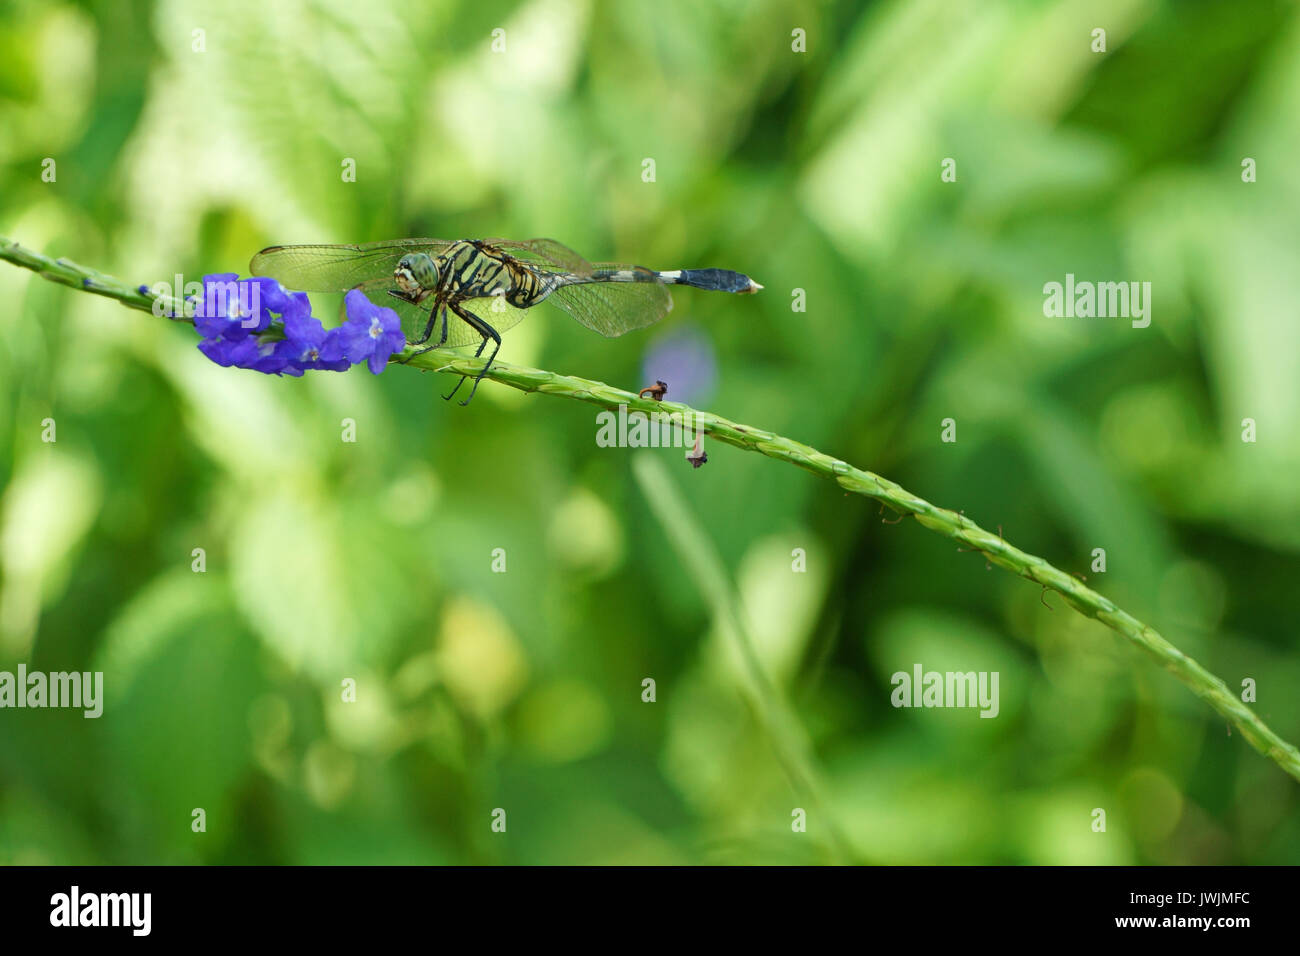 Dragonfly (Anisoptera) with purple flowers Stock Photo